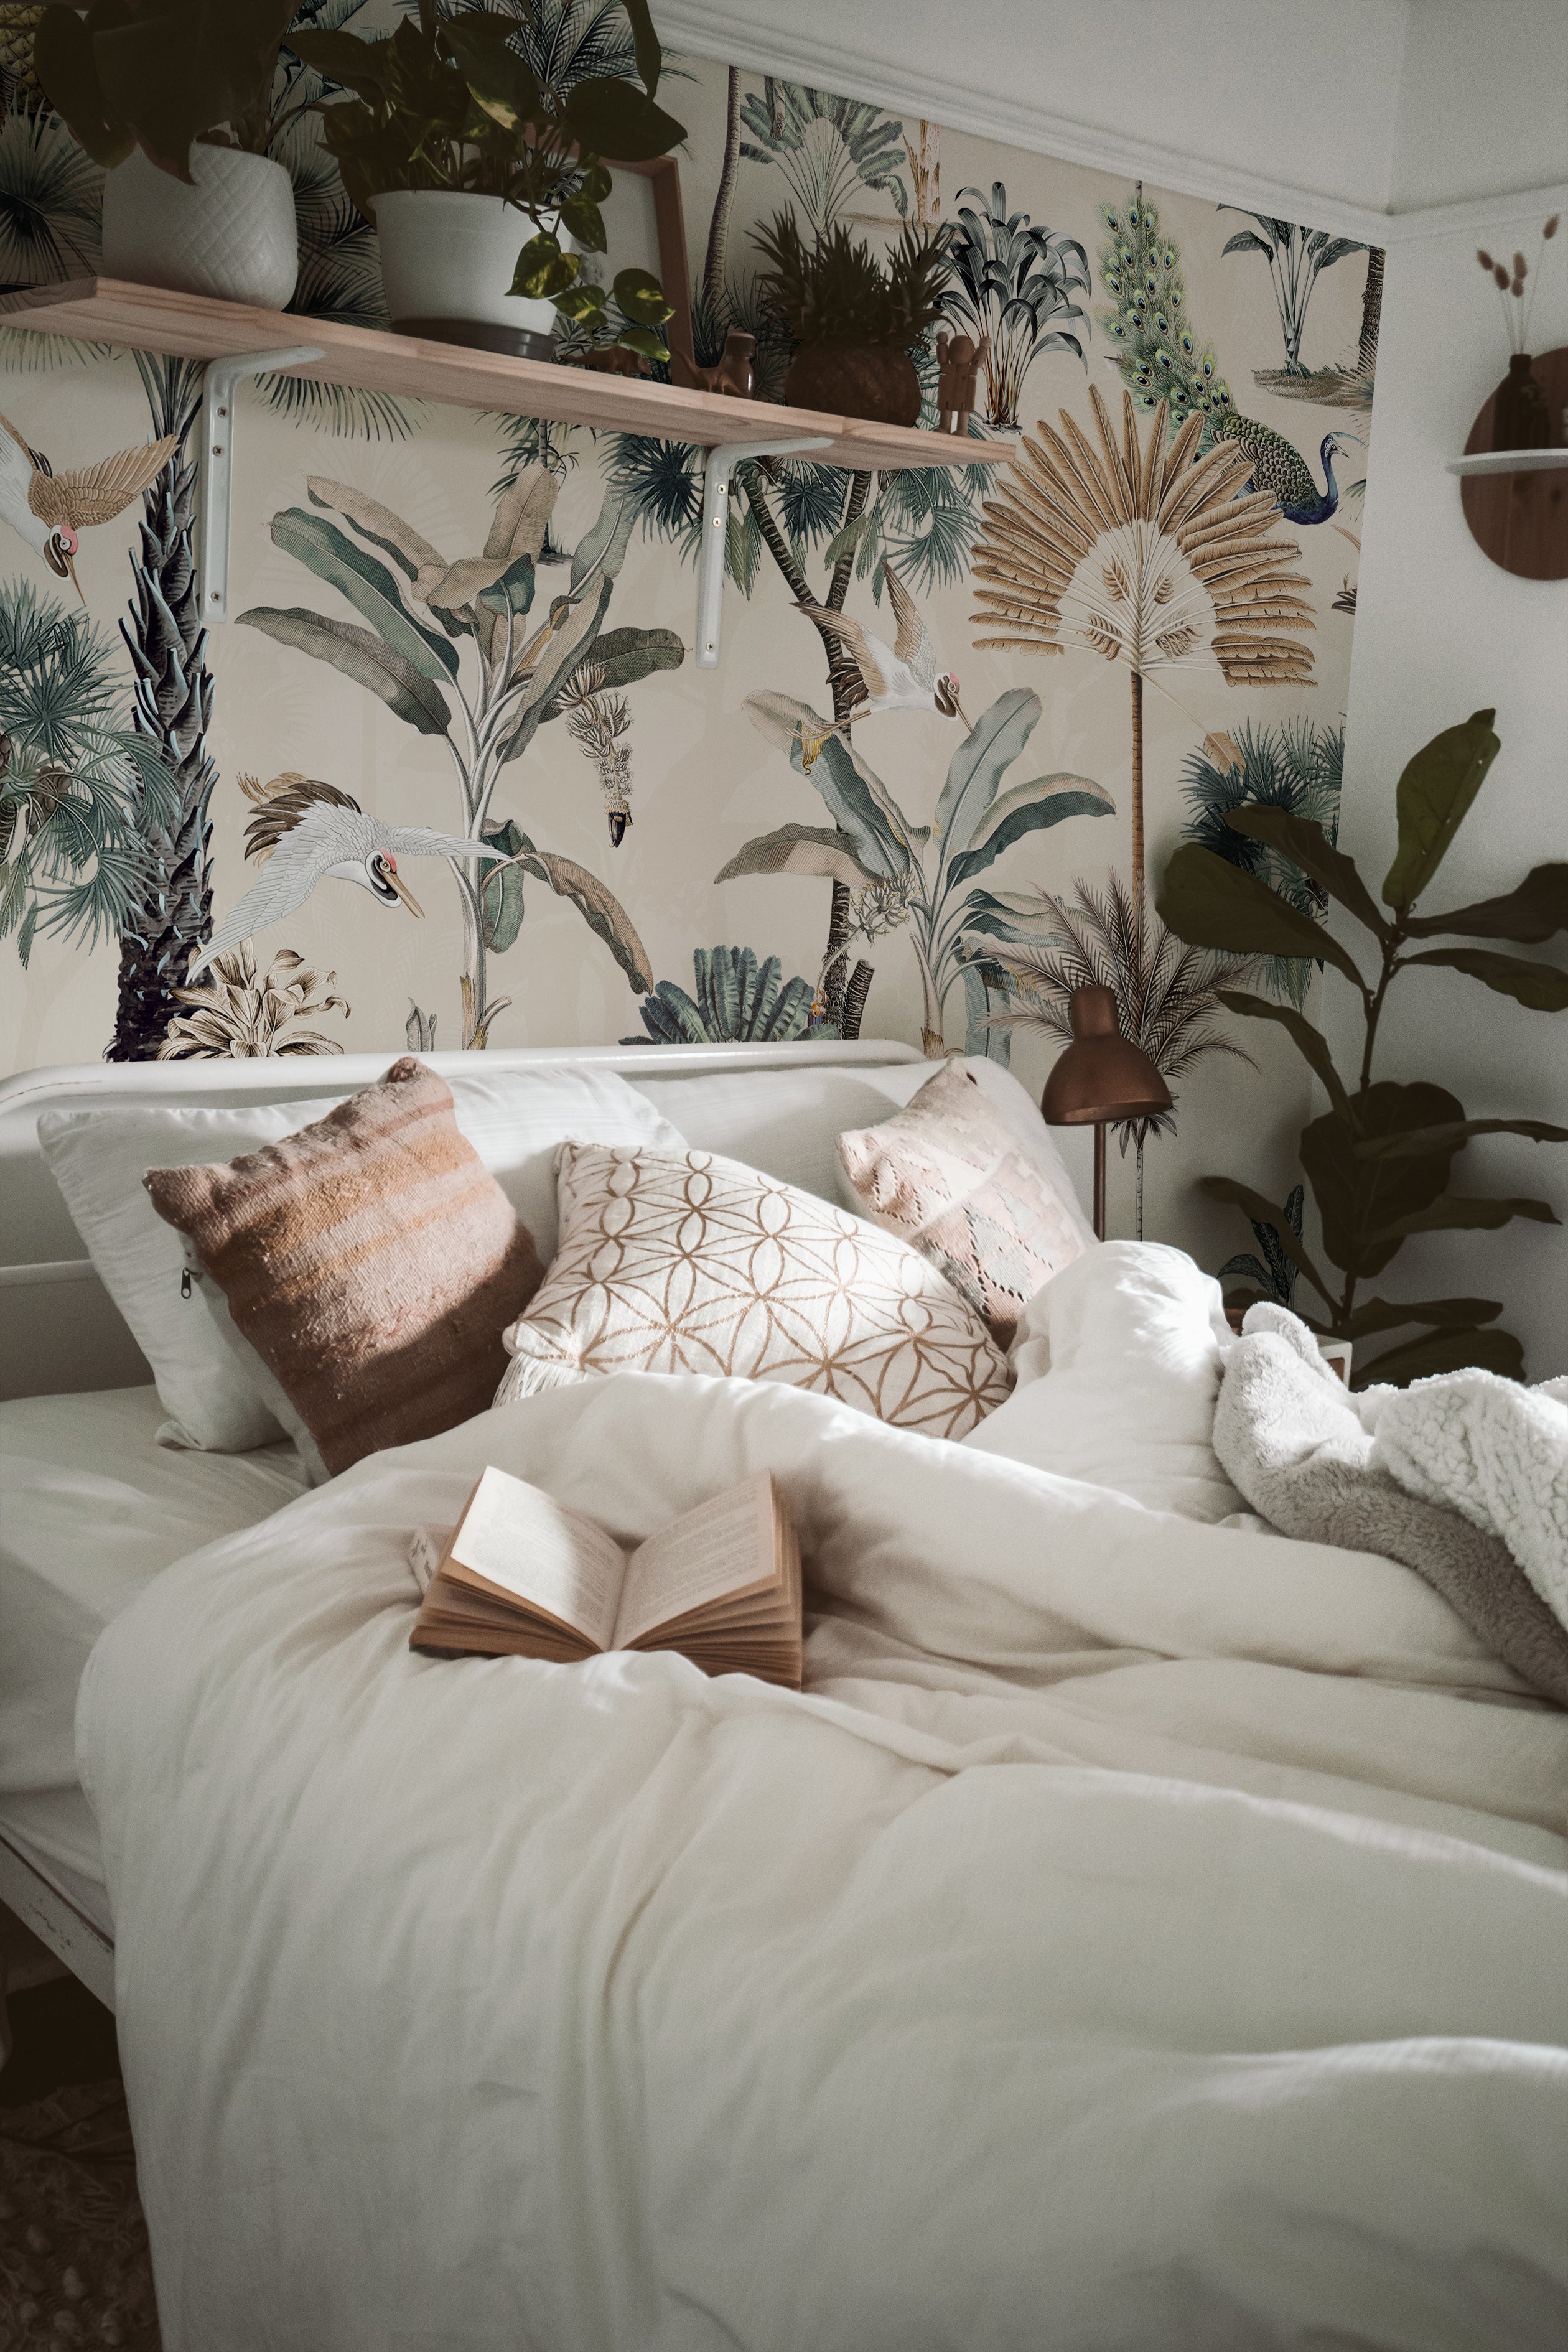 A cozy bedroom setting showcasing the Exotic Ecru Wallpaper on the wall behind the bed. The tropical motif, with its detailed depiction of various palms, birds, and exotic foliage, creates a lively yet soothing backdrop